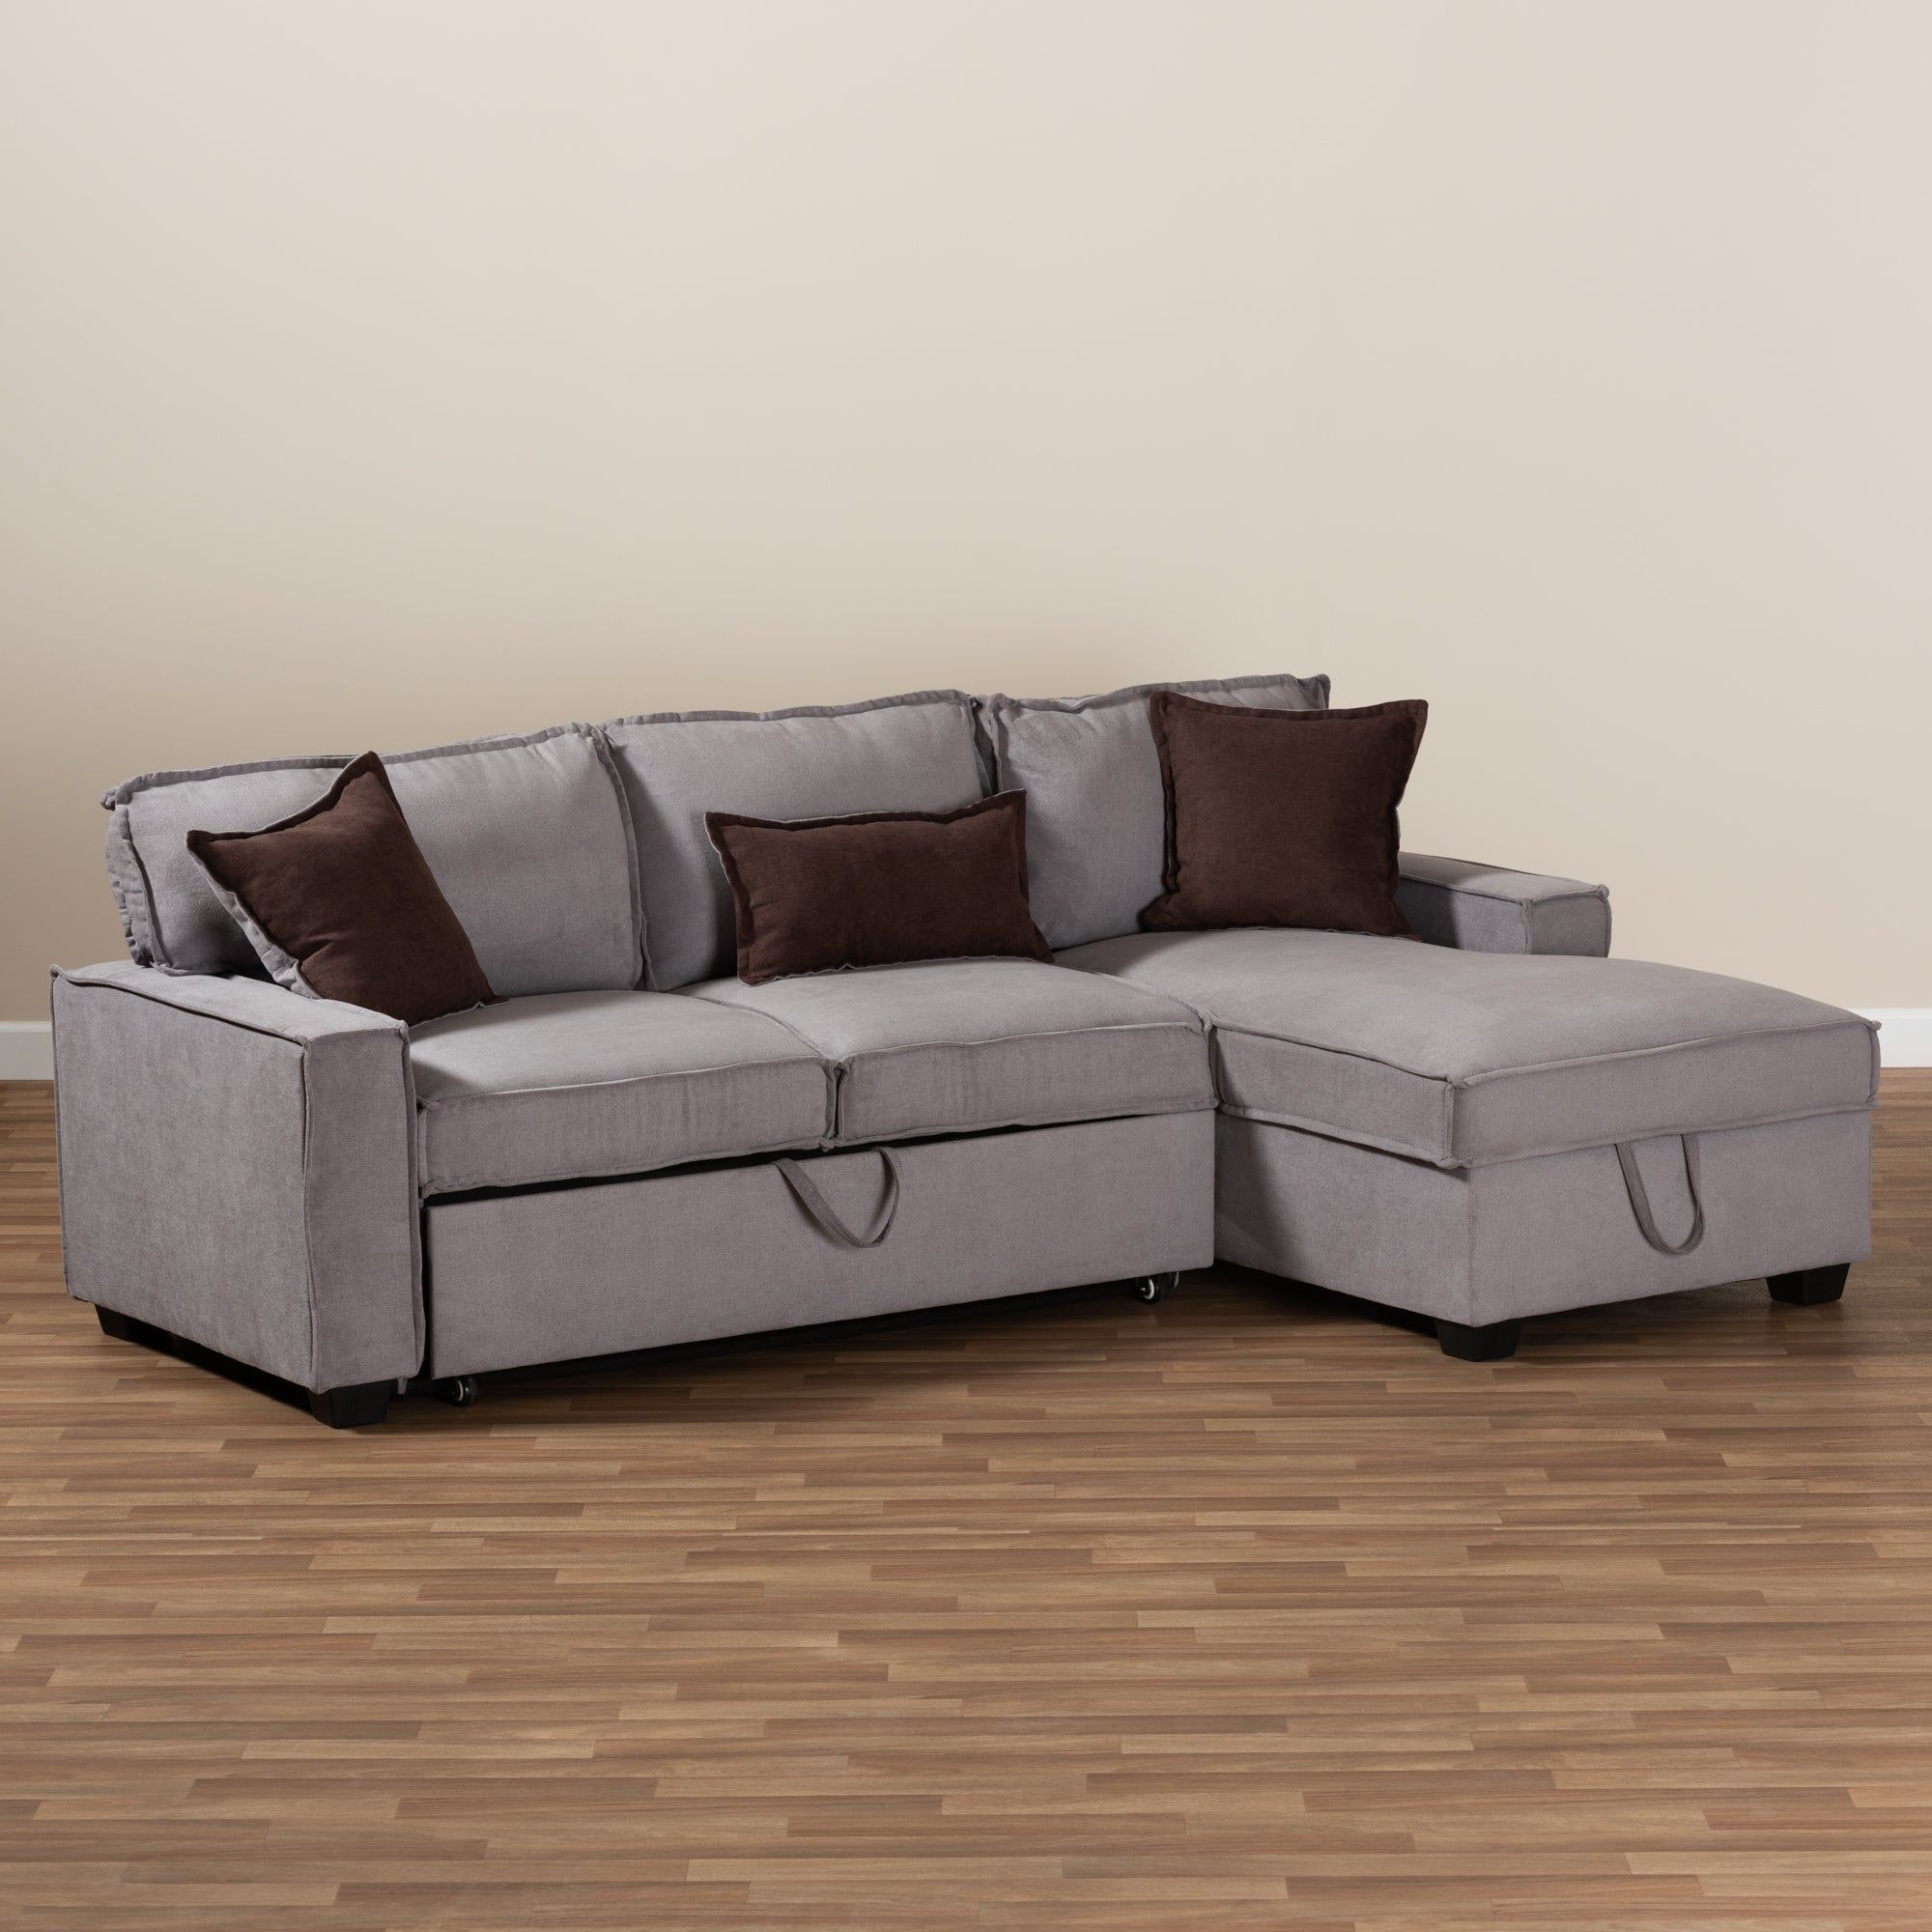 Functioning As A Sofa, Bed, And Storage All In One, The Emile Sofa Is A Within Right Facing Black Sofas (View 7 of 20)